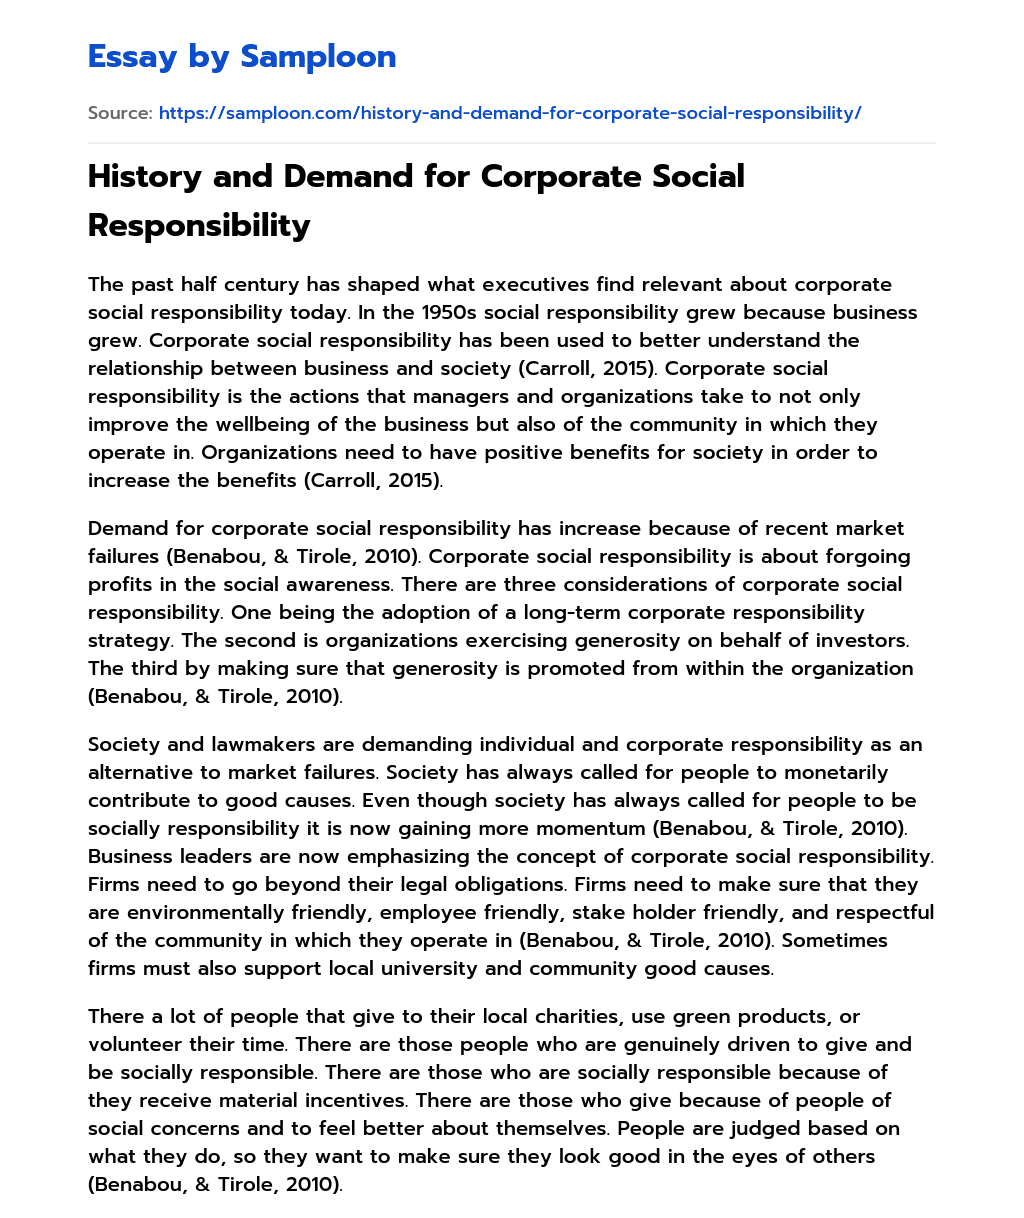 History and Demand for Corporate Social Responsibility essay